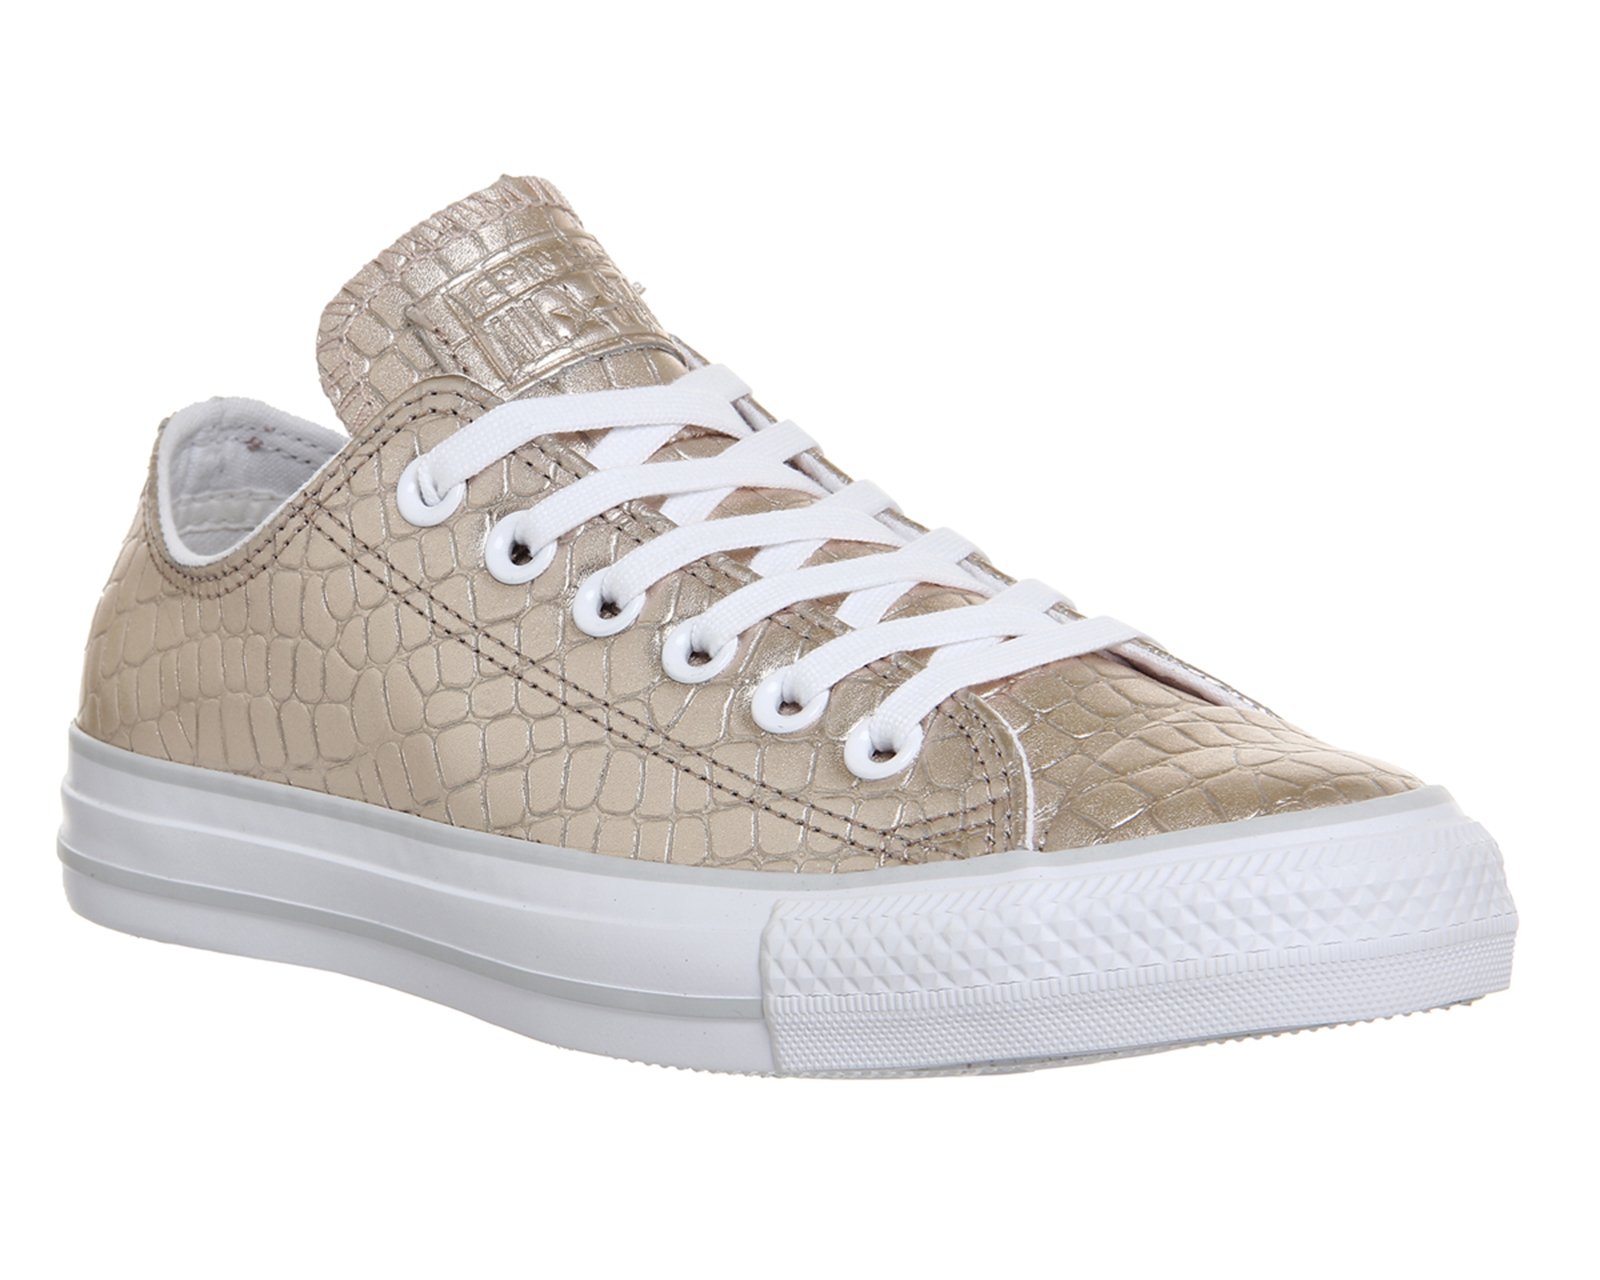 Converse All Star Low Leather Rose Gold Croc - Unisex Sports